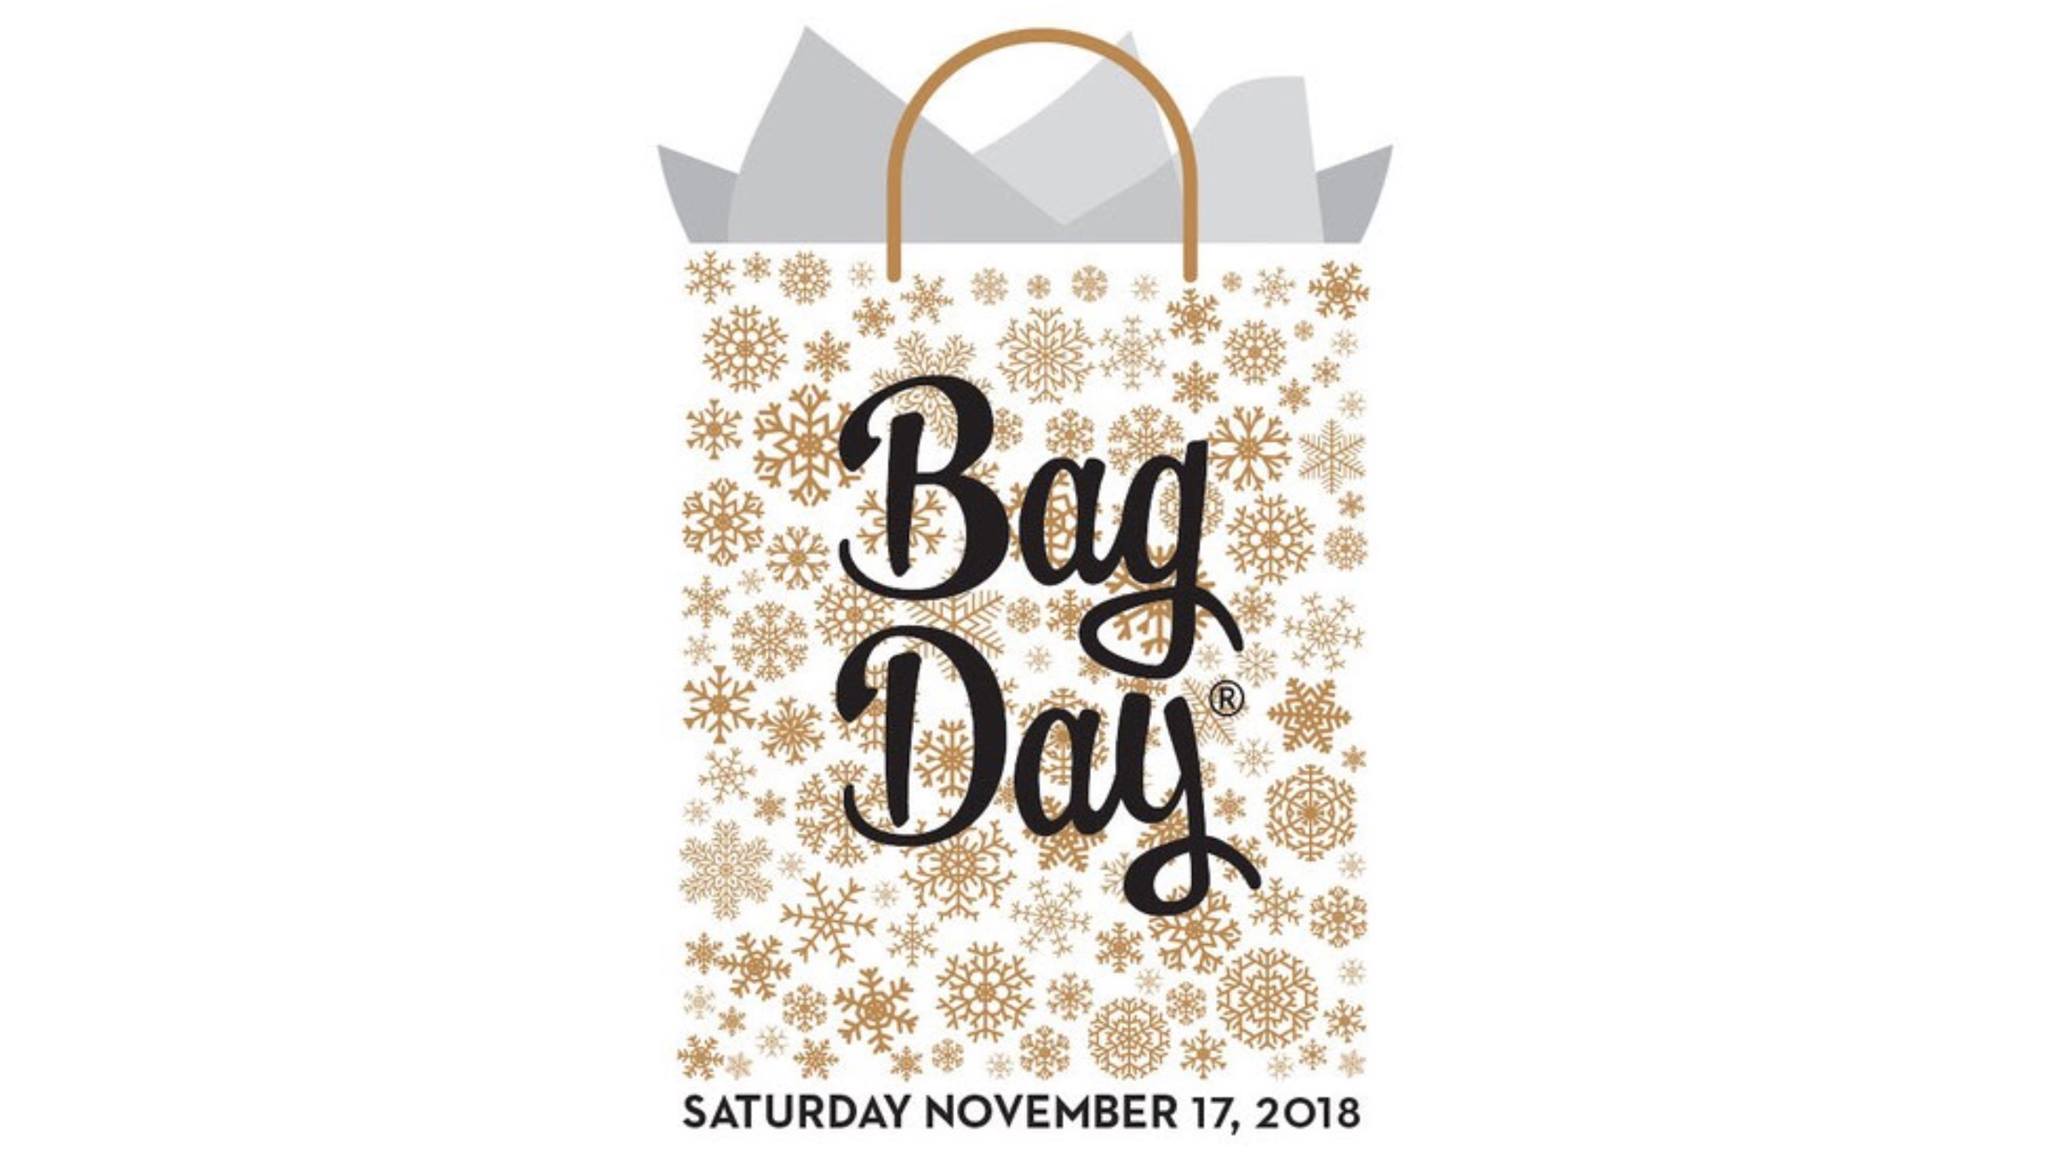 Bag Day is Coming - Greater Northampton Chamber of Commerce